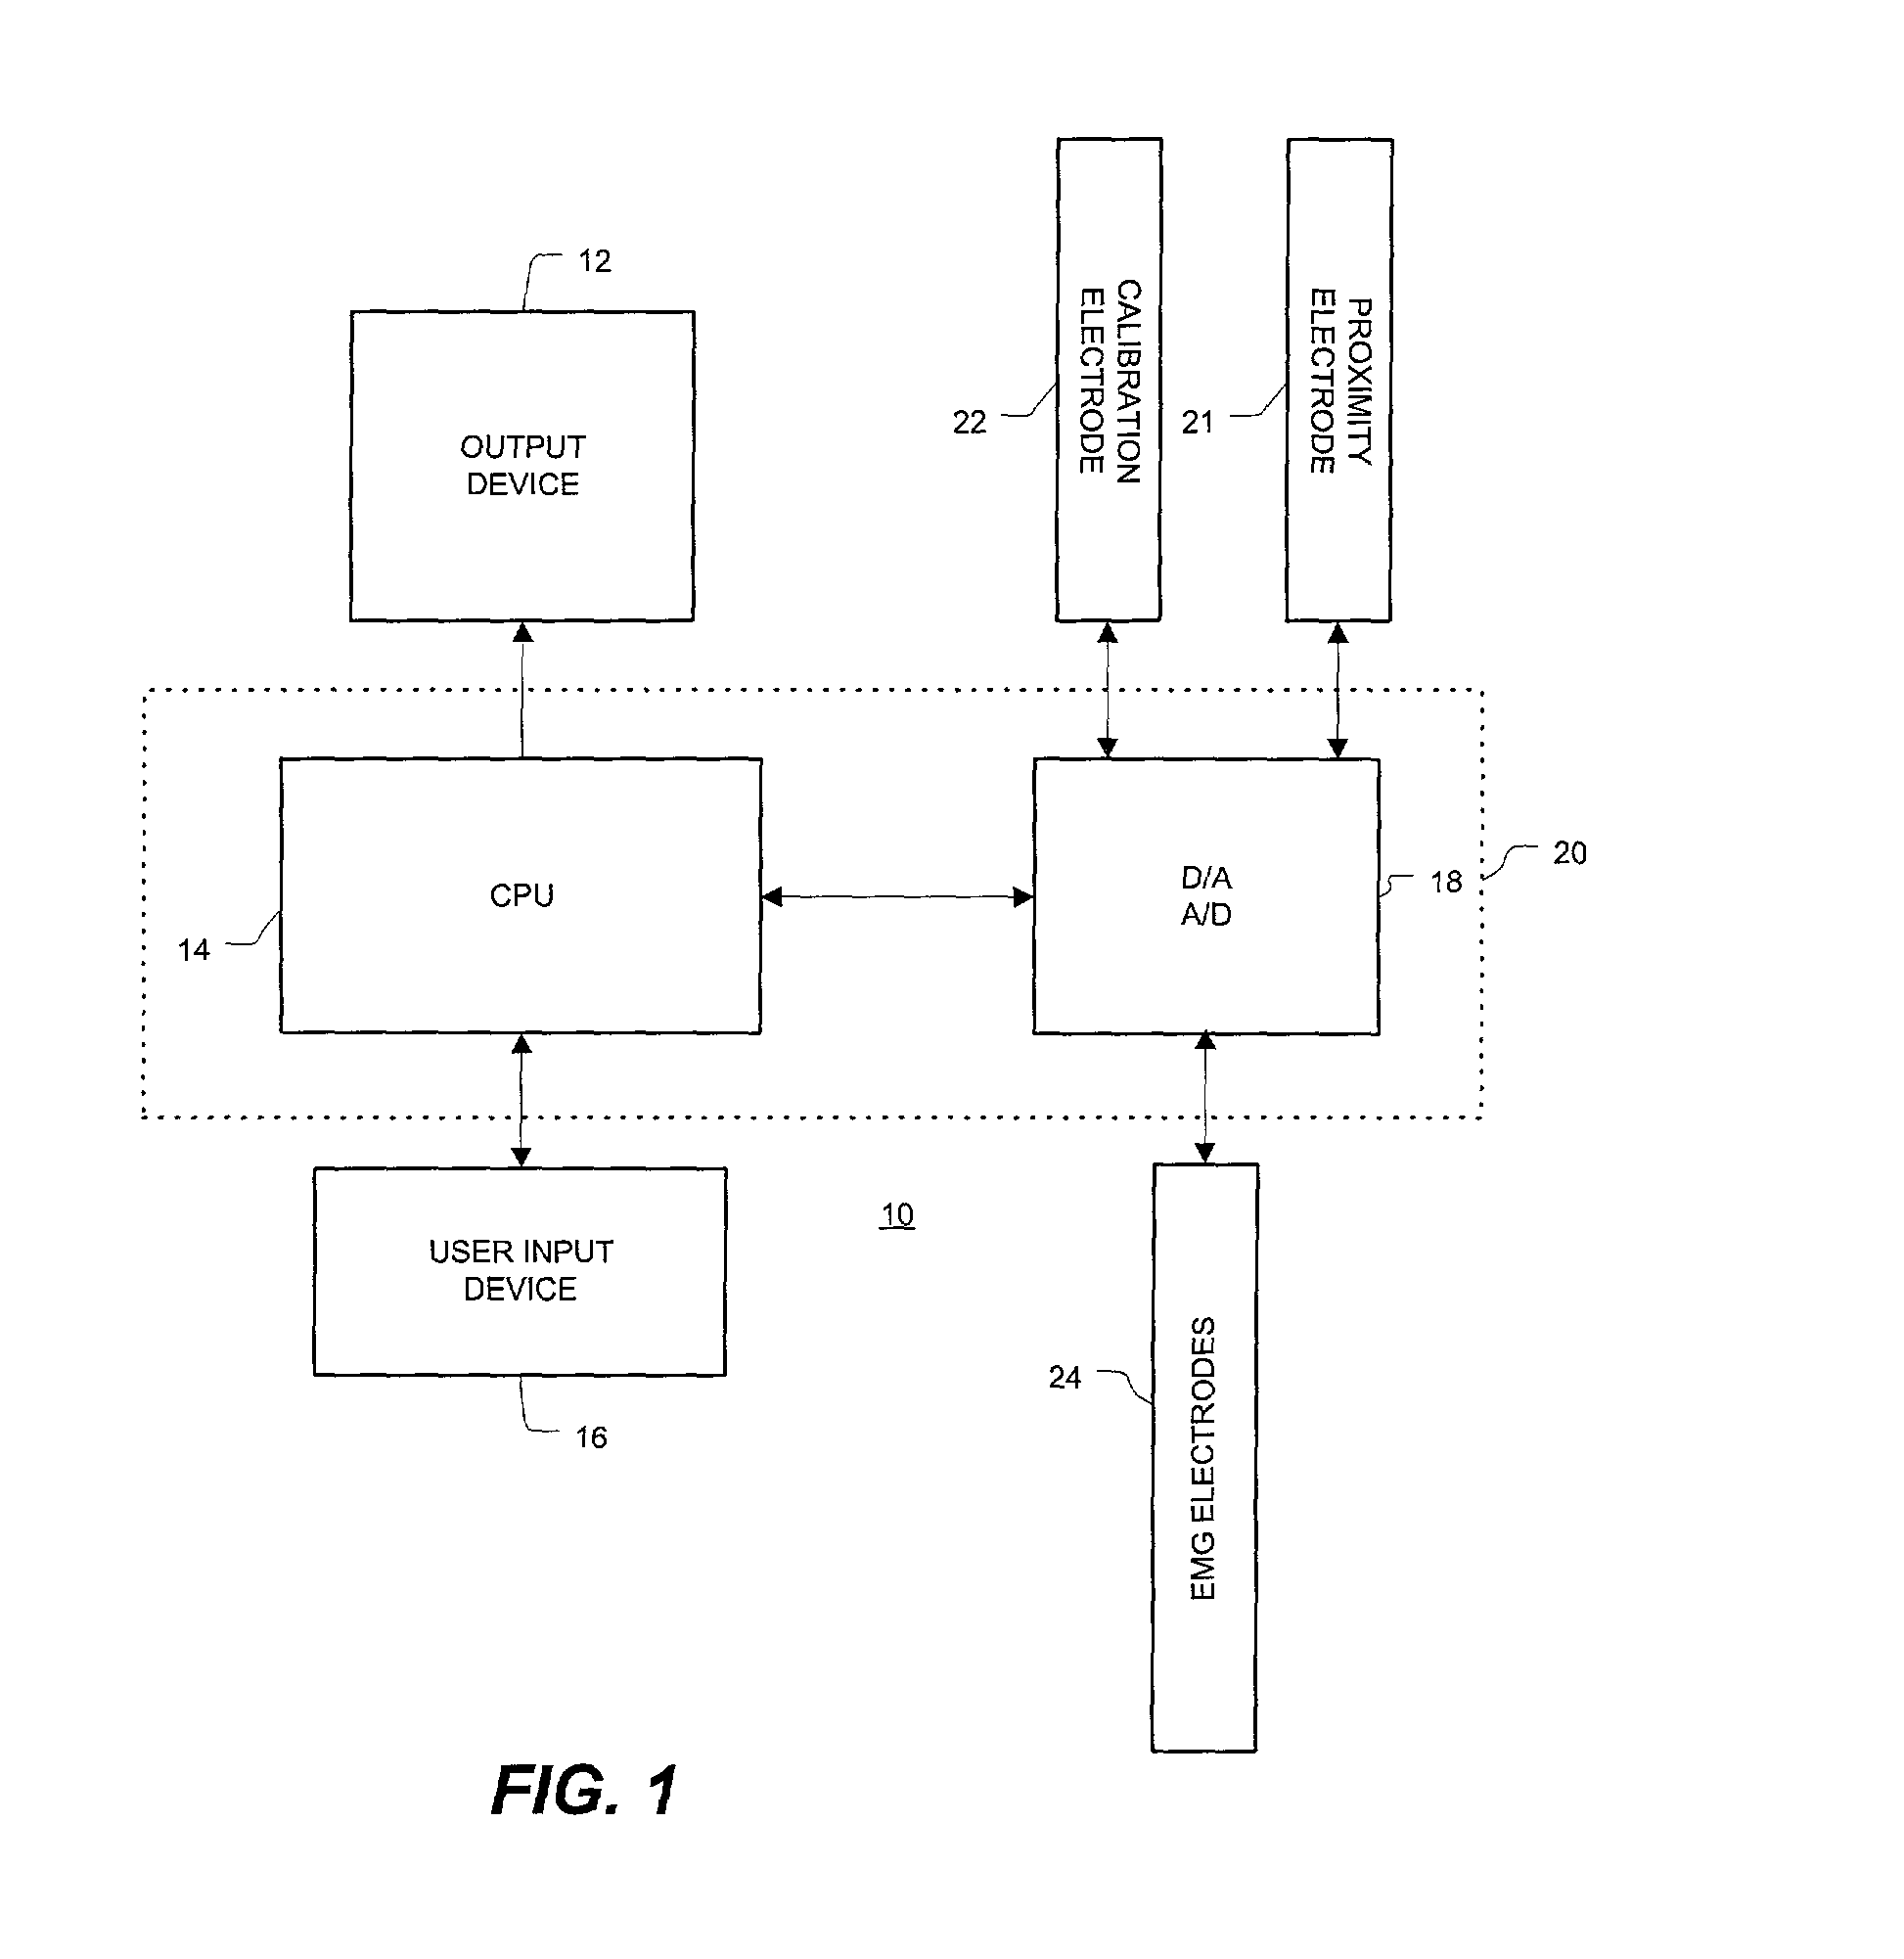 Nerve movement and status detection system and method